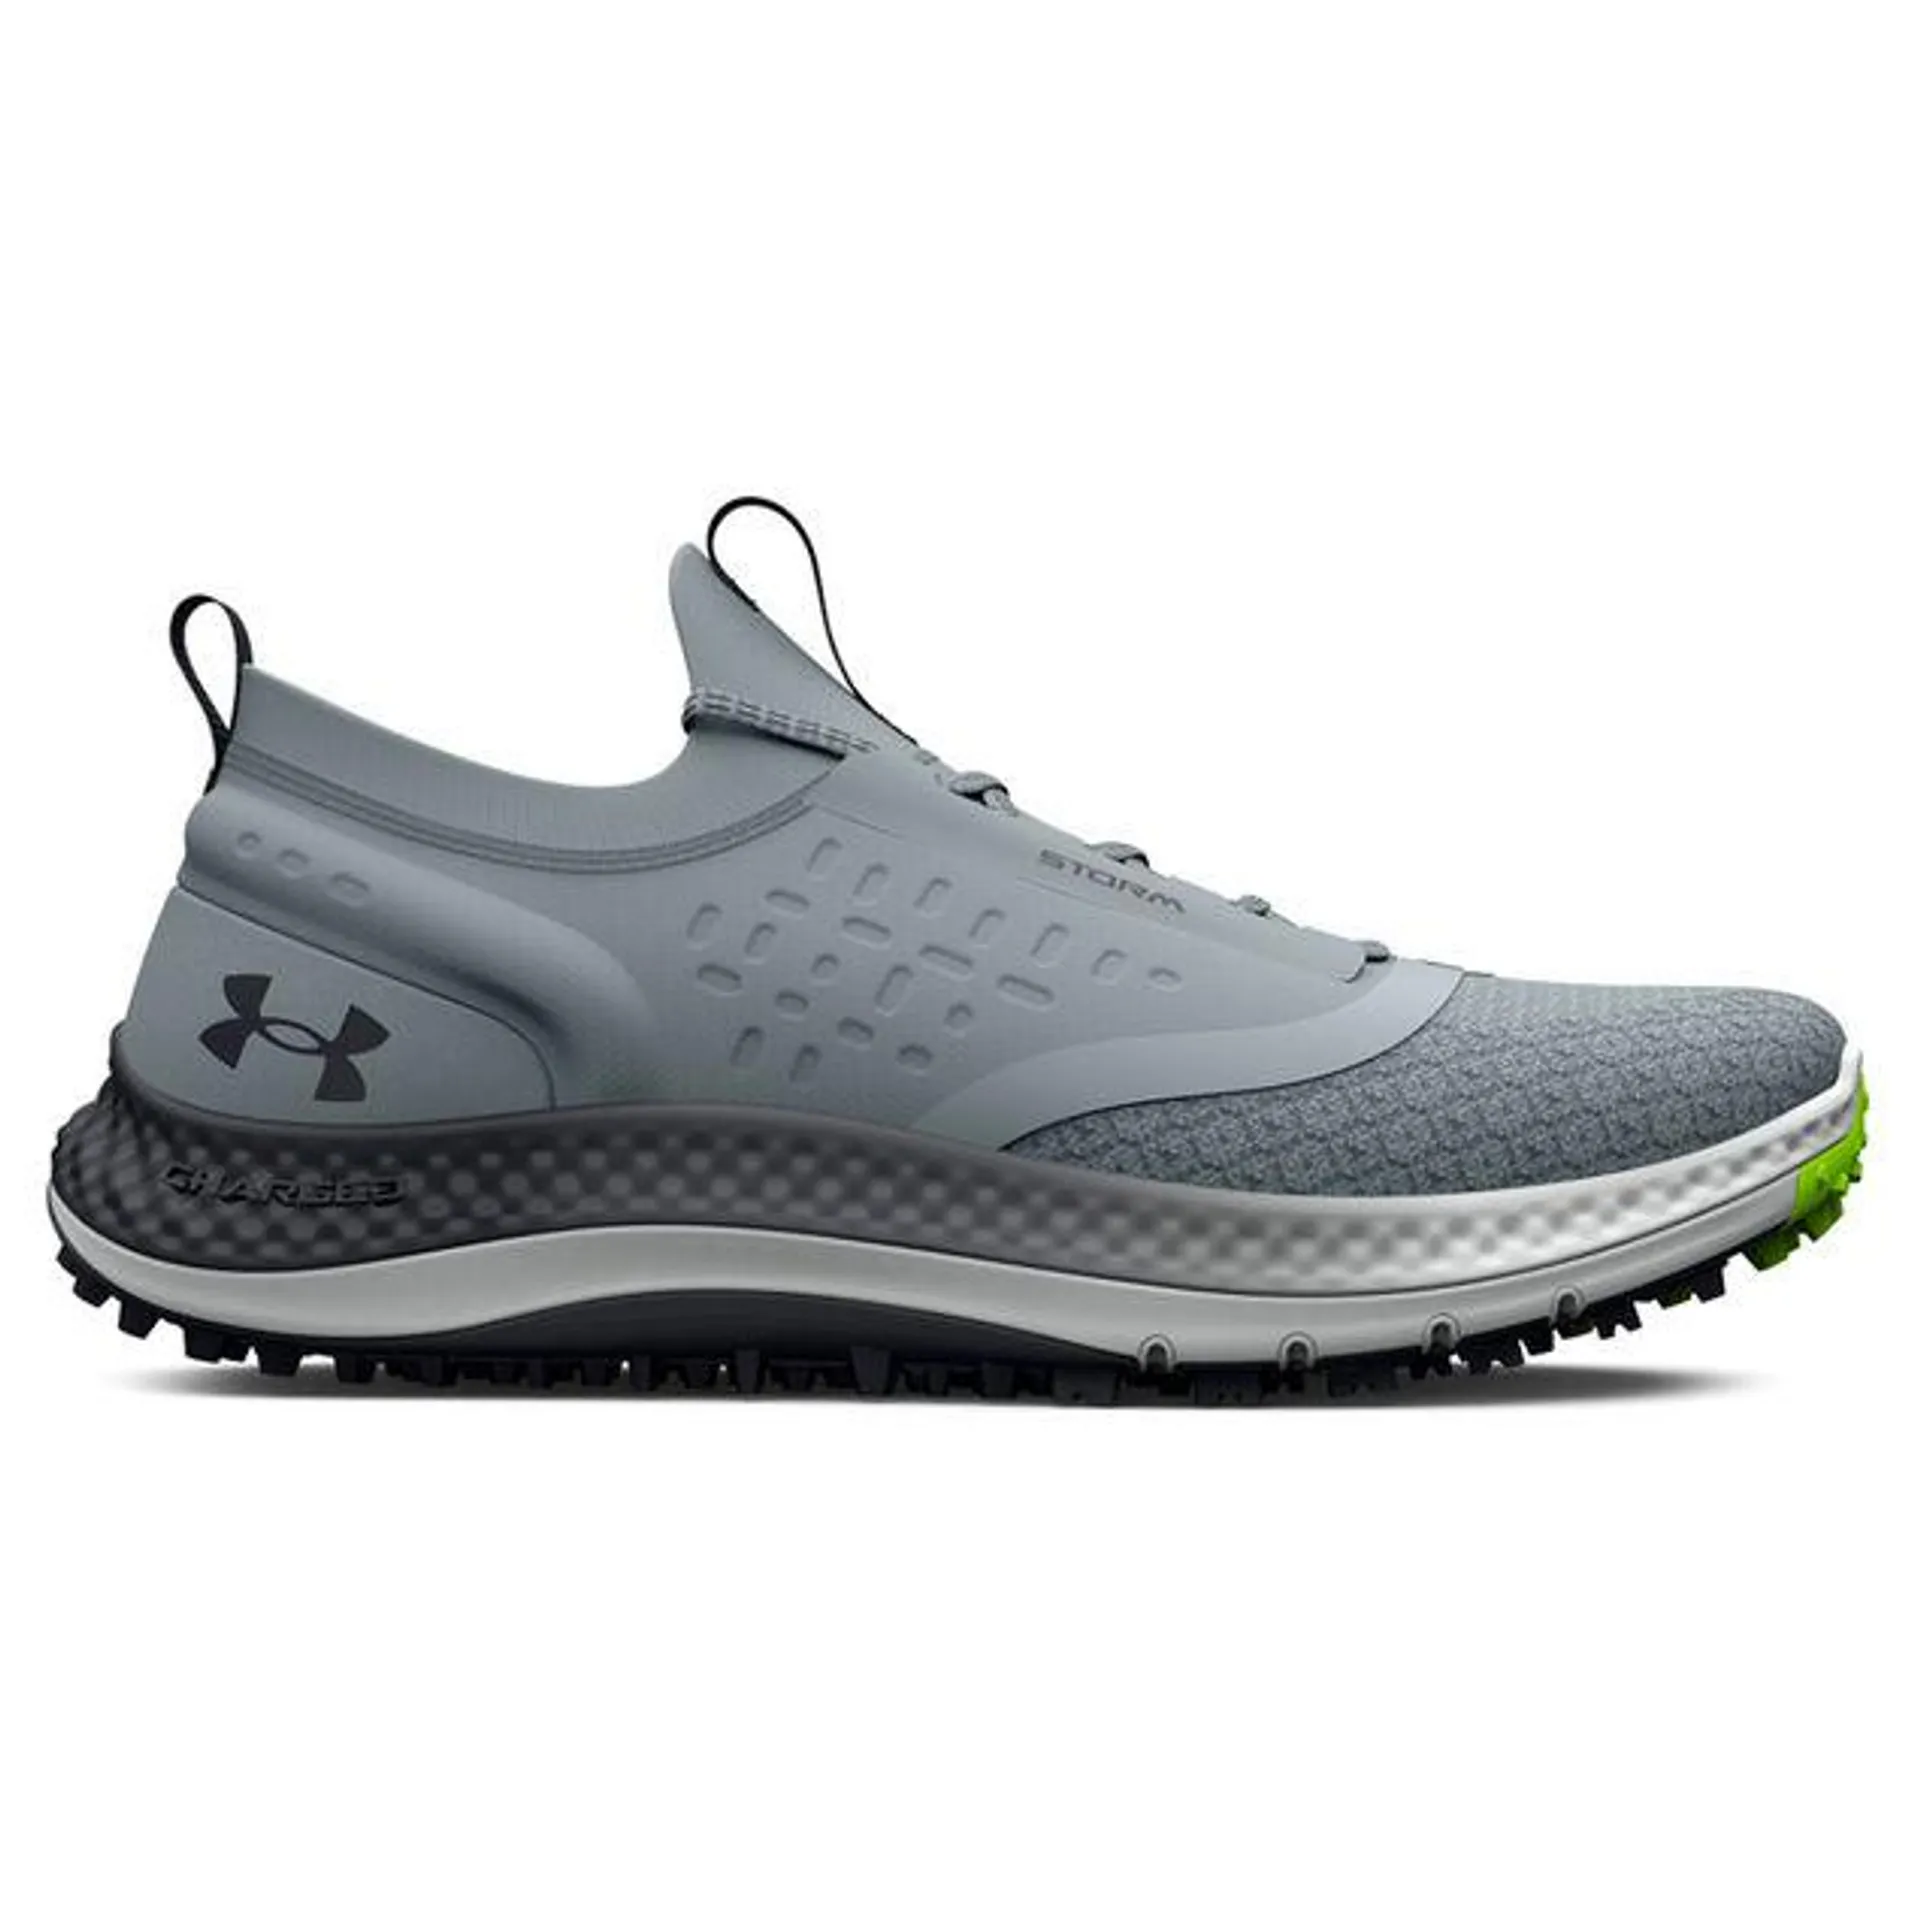 Under Armour Men's Charged Phantom Spikeless Golf Shoes